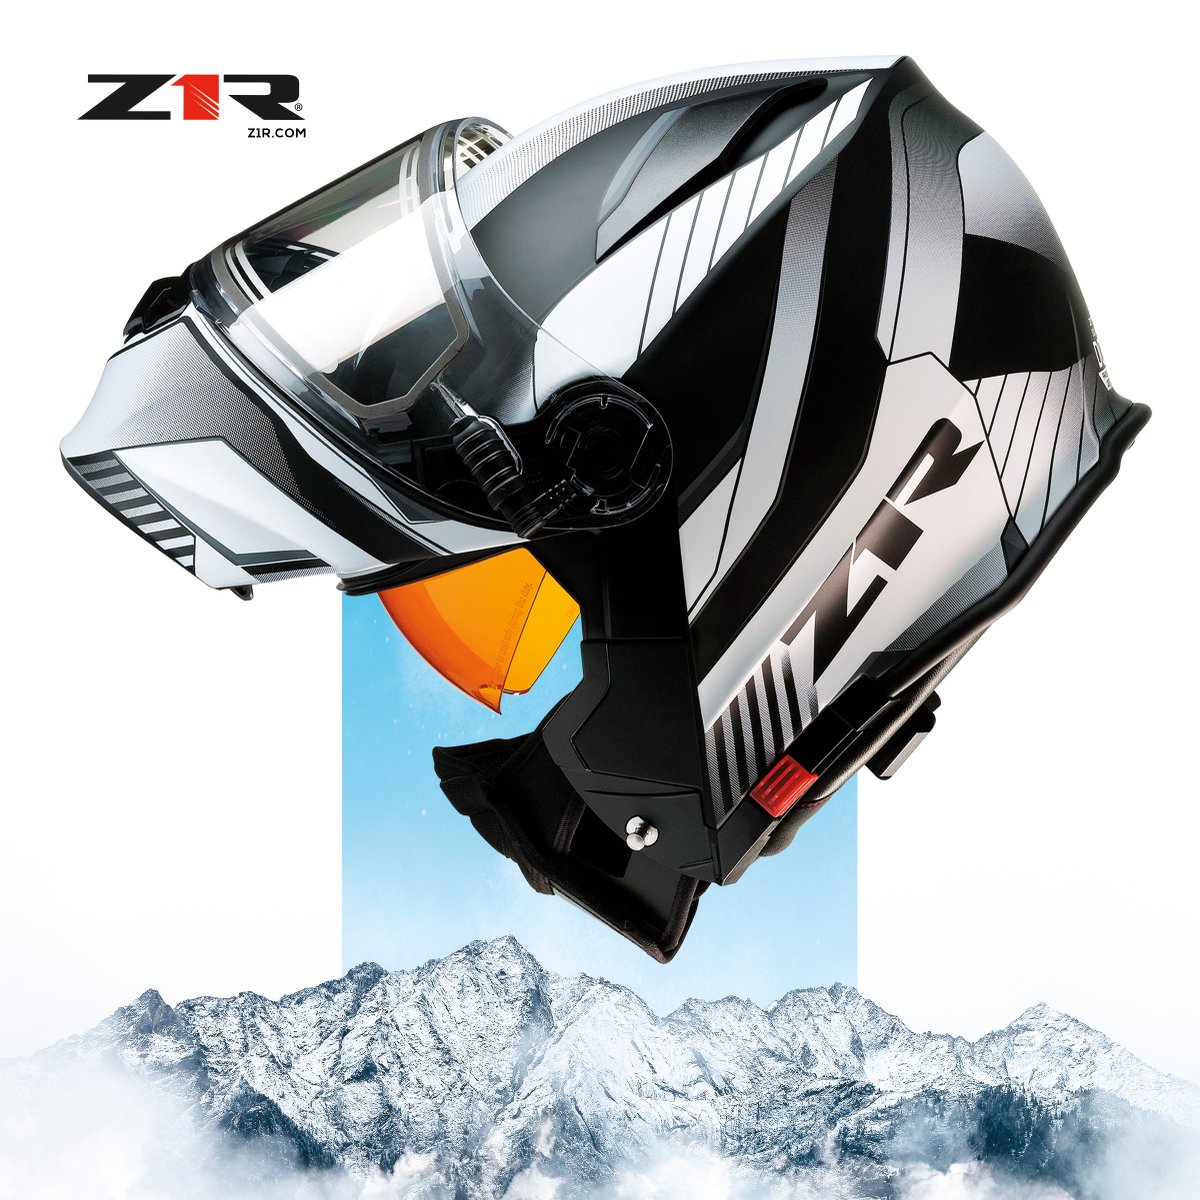 It's that time of year again to find yourself a new snow helmet. The all new Solaris Scythe Electric can help you bear all the elements. Visit Z1R.com to learn more. - #RideZ1R